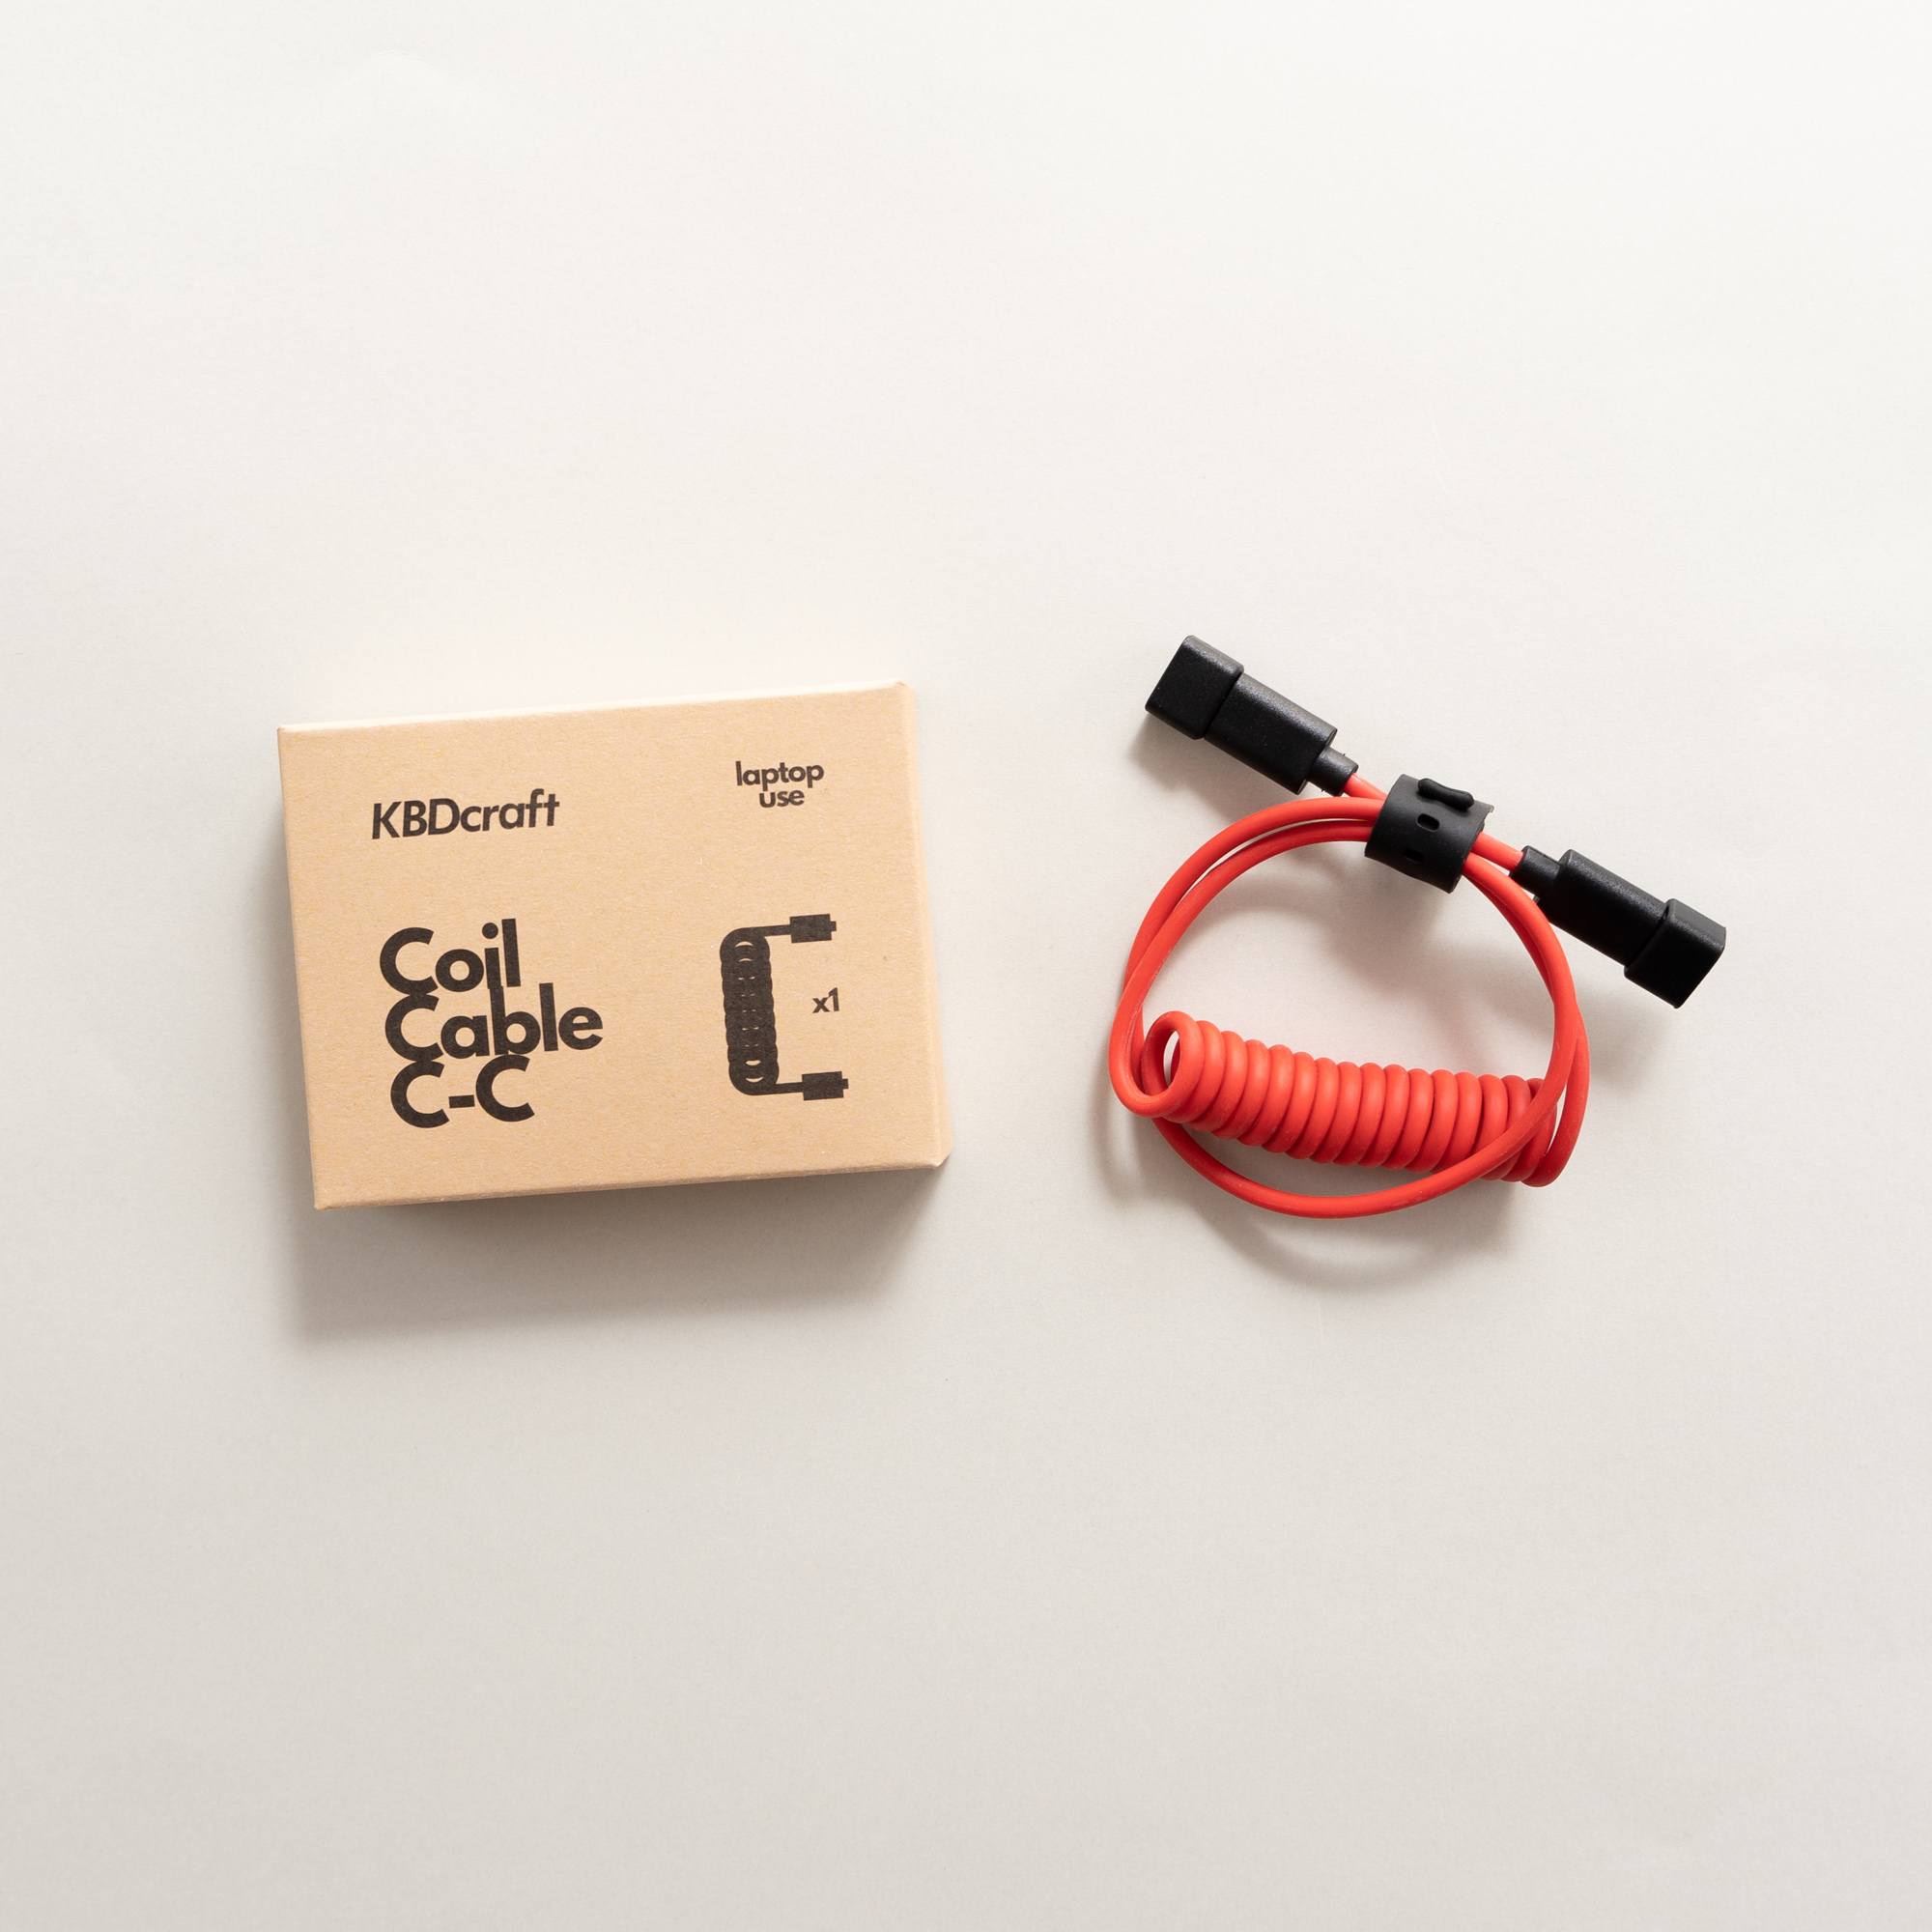 Coil Cable C-C